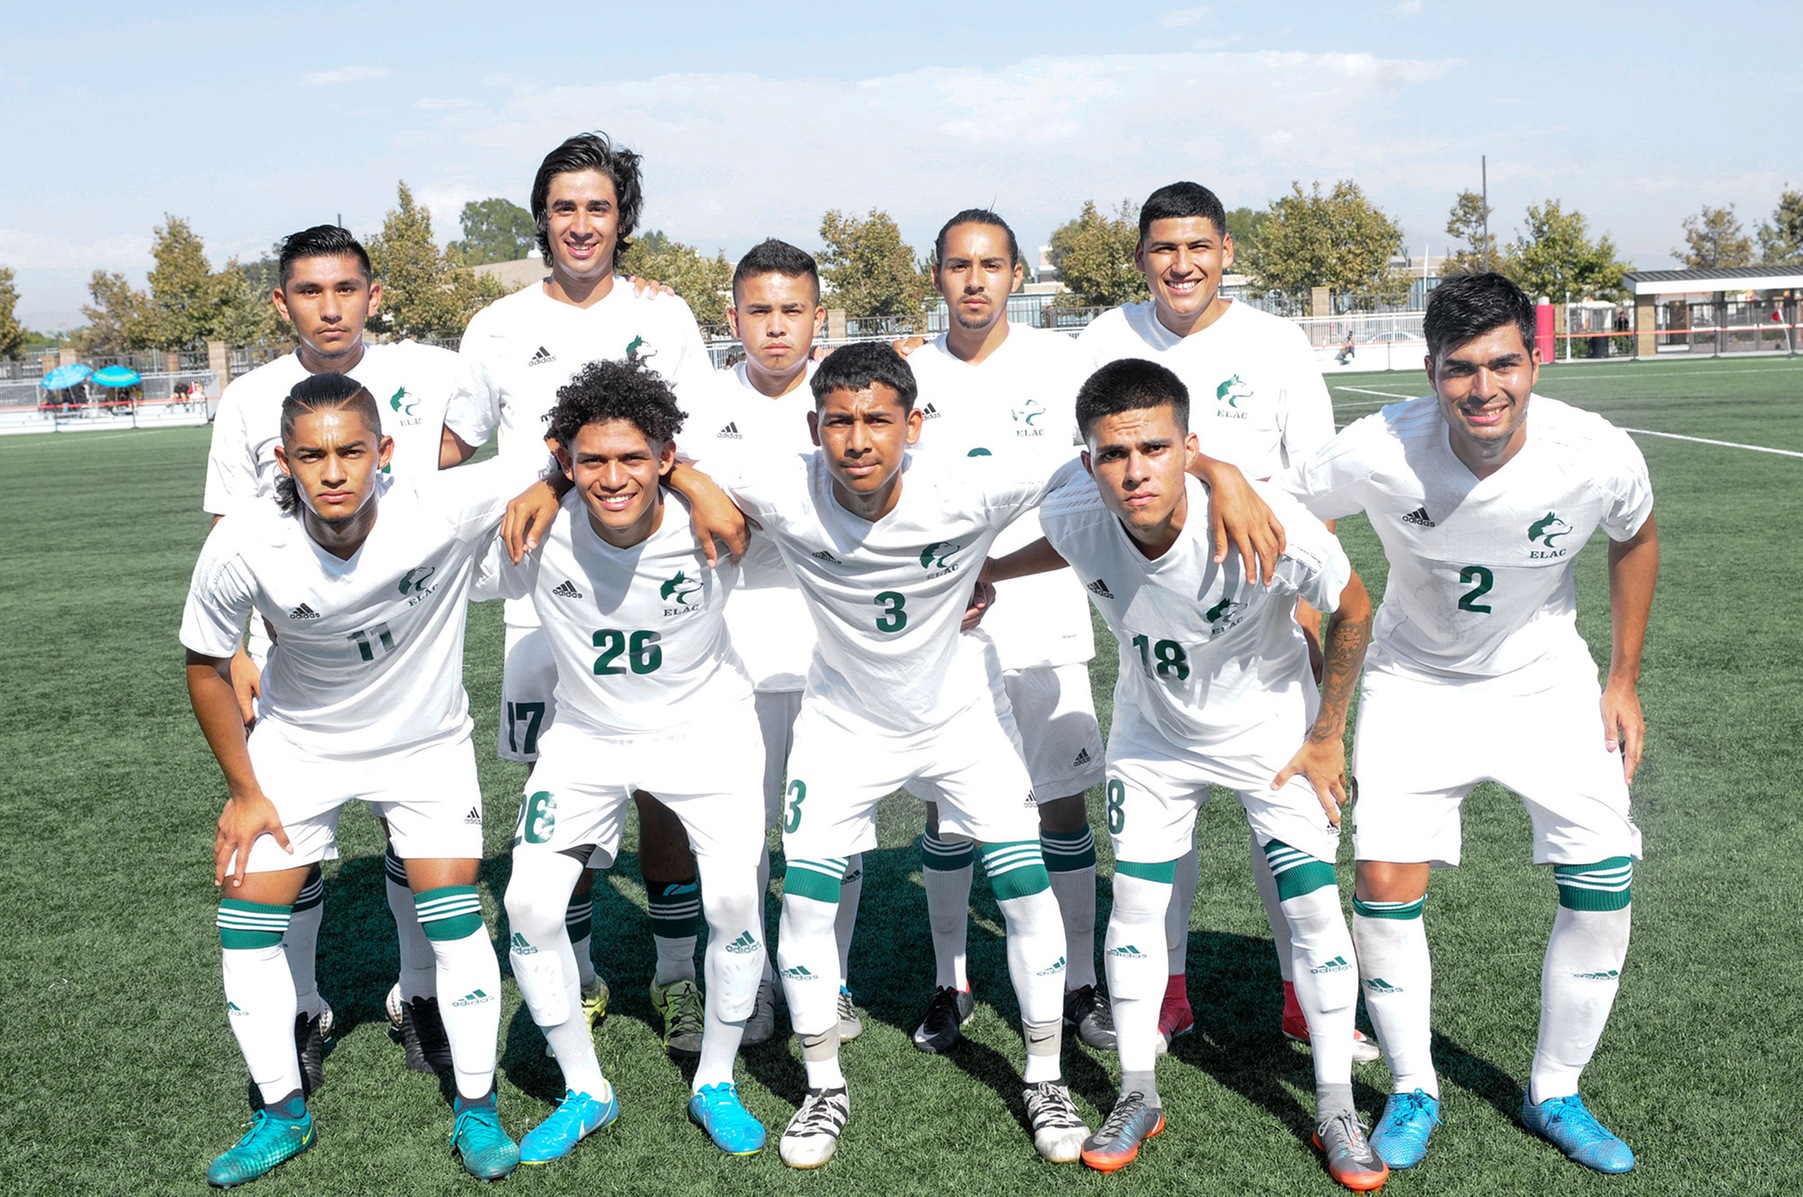 Members of the 2017-18 East Los Angeles College men's soccer team. (Photo by Tadzio Garcia)